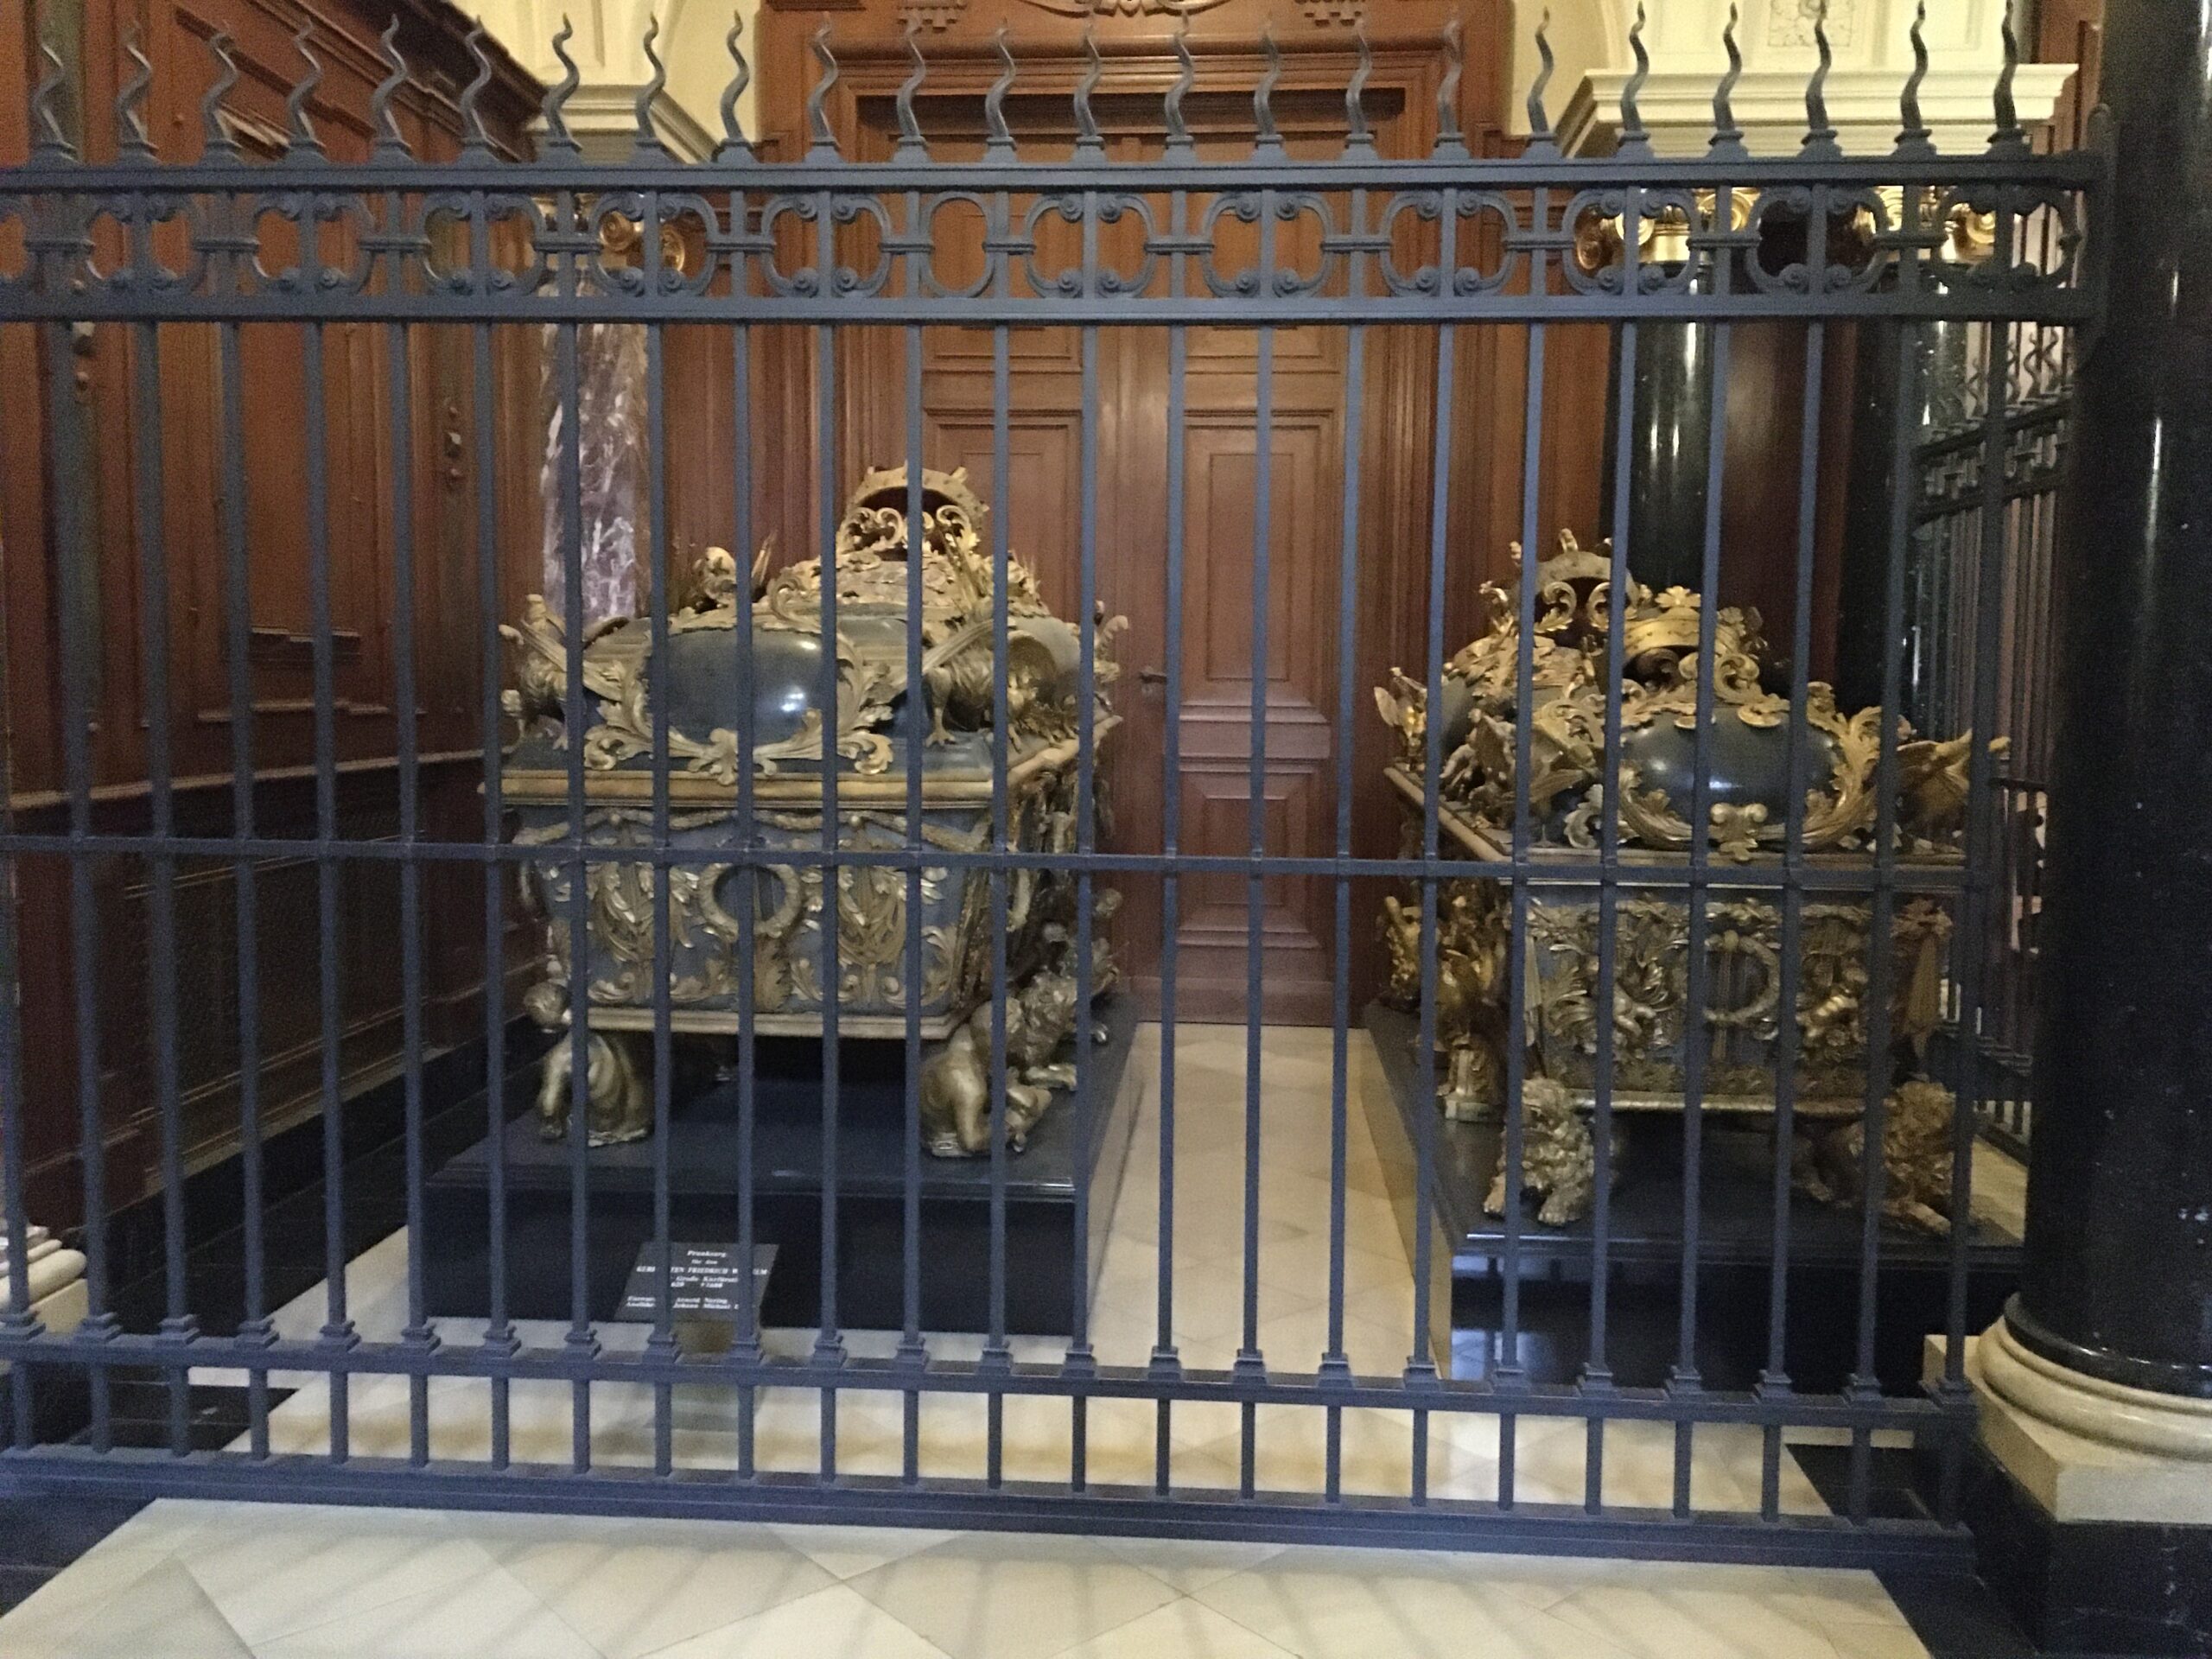 Two tombs displayed inside the Berlin Cathedral.